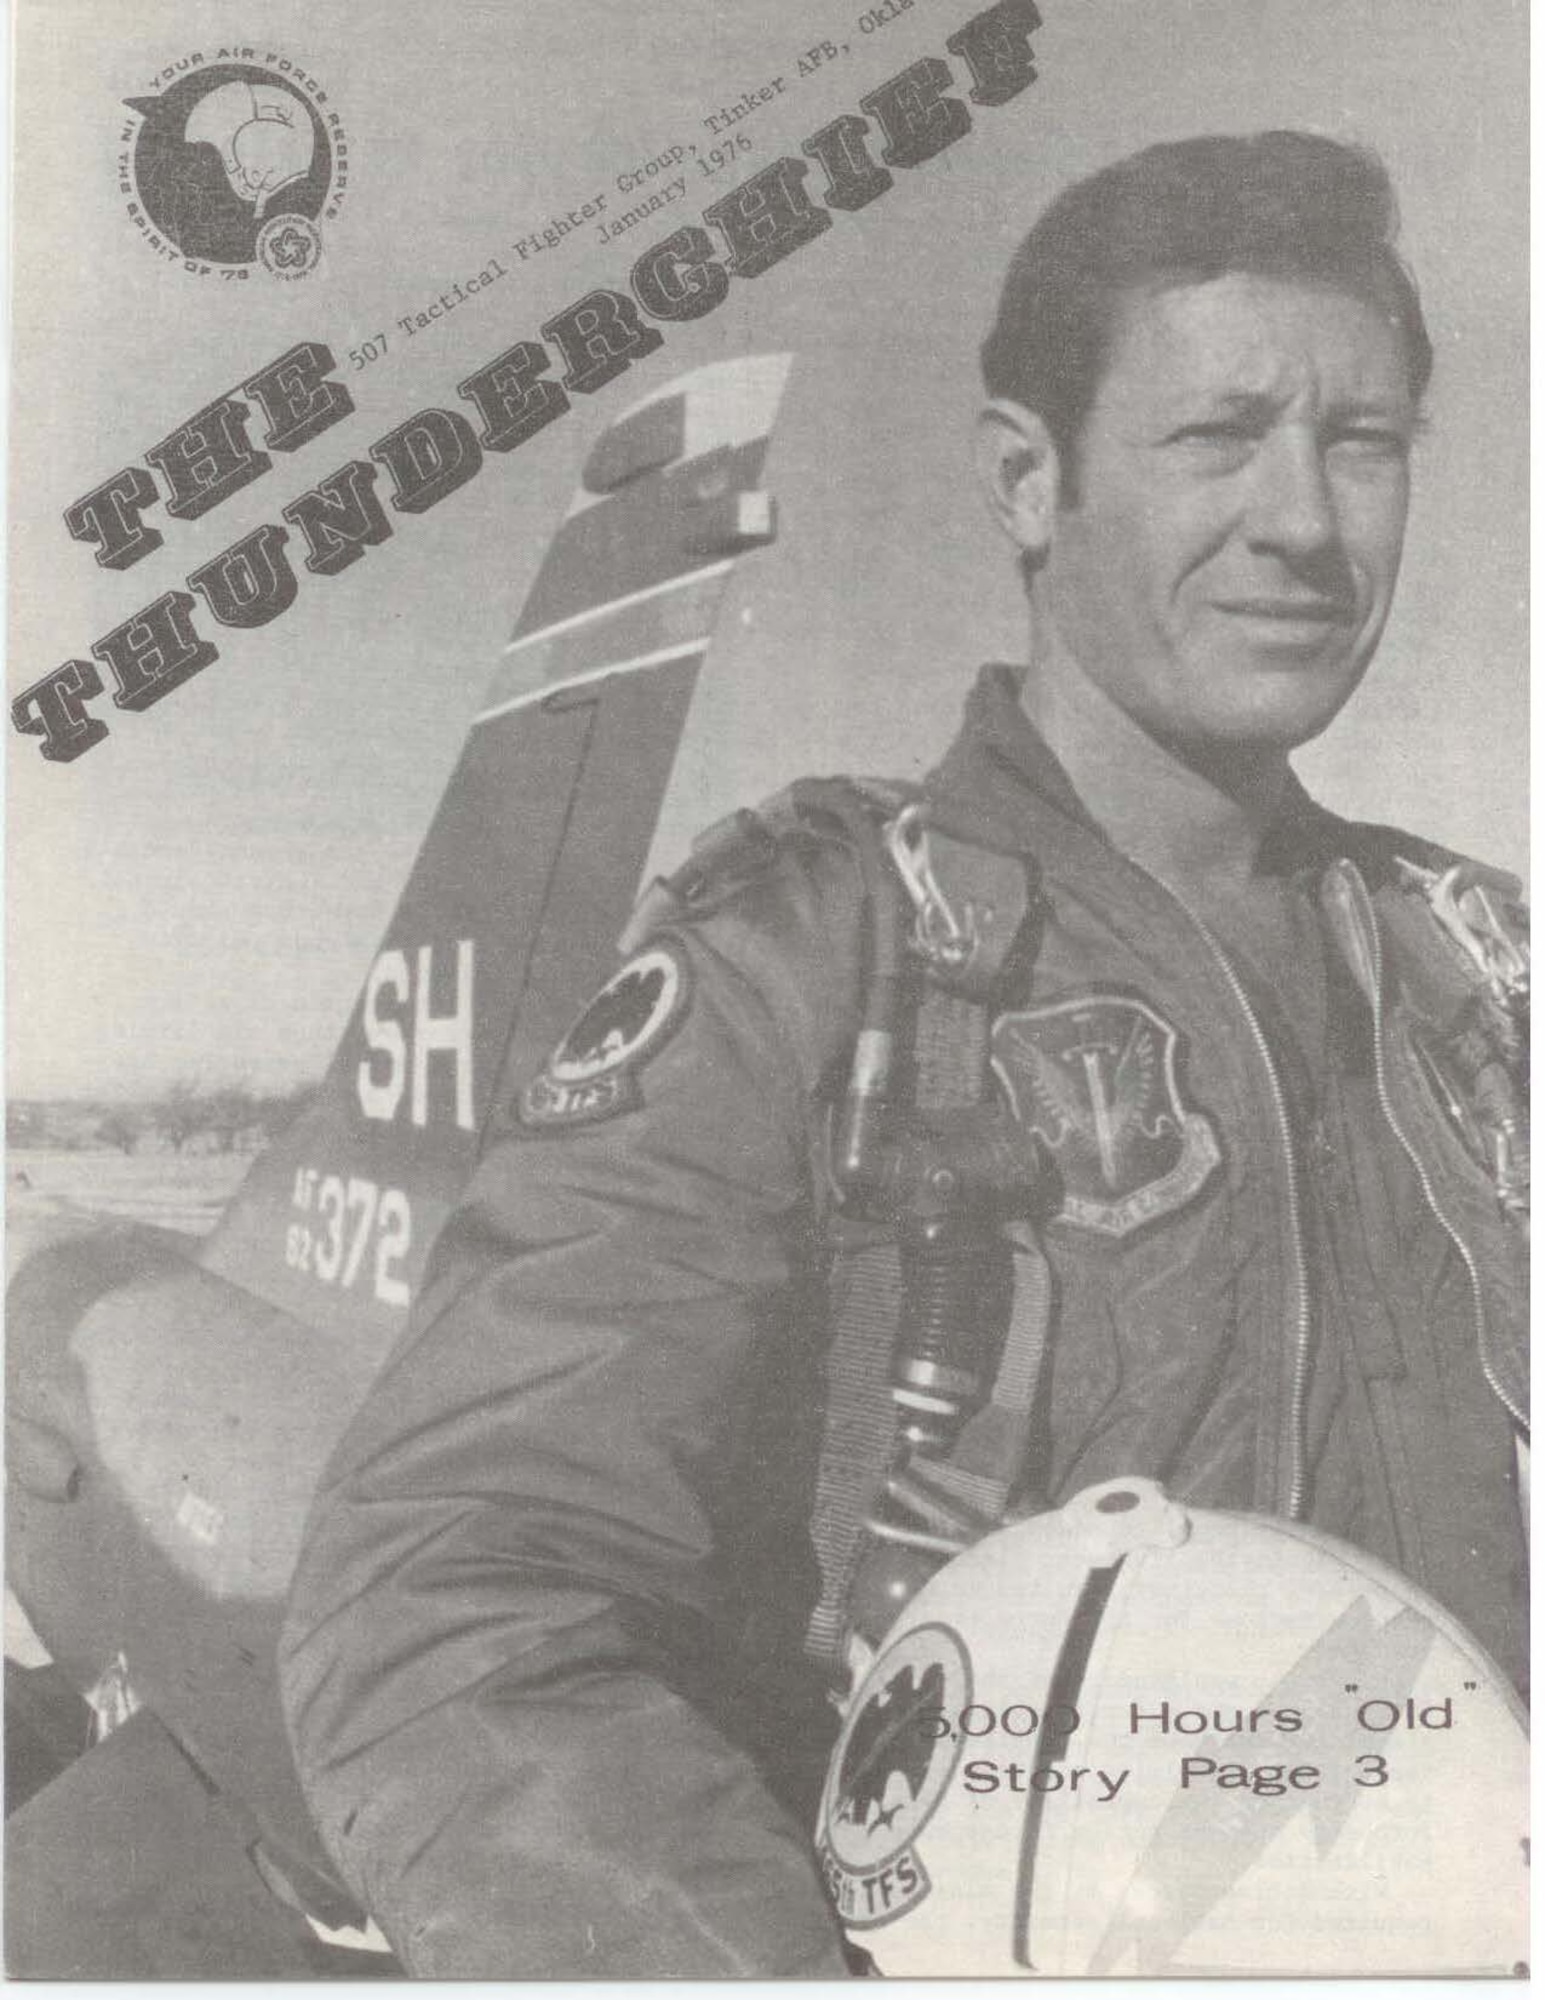 This is the cover of the Thunderchief newspaper from January 1975.  The Newspaper details the mission of the 507th Tactical Group, U.S. Air Force Reserve at Tinker Force Base, Oklahoma.  The cover story is about a Reserve pilot that flew an F-105 for its 5,000th hour.  The 507th Tactical Fighter Group reactivated here and replaced the 937th Military Airlift Group for the Air Force Reserve on May 20, 1972. This made the 507th TFG the first Air Force Reserve group to have fighter aircraft in nearly twenty years. (U.S. Air Force Photo)